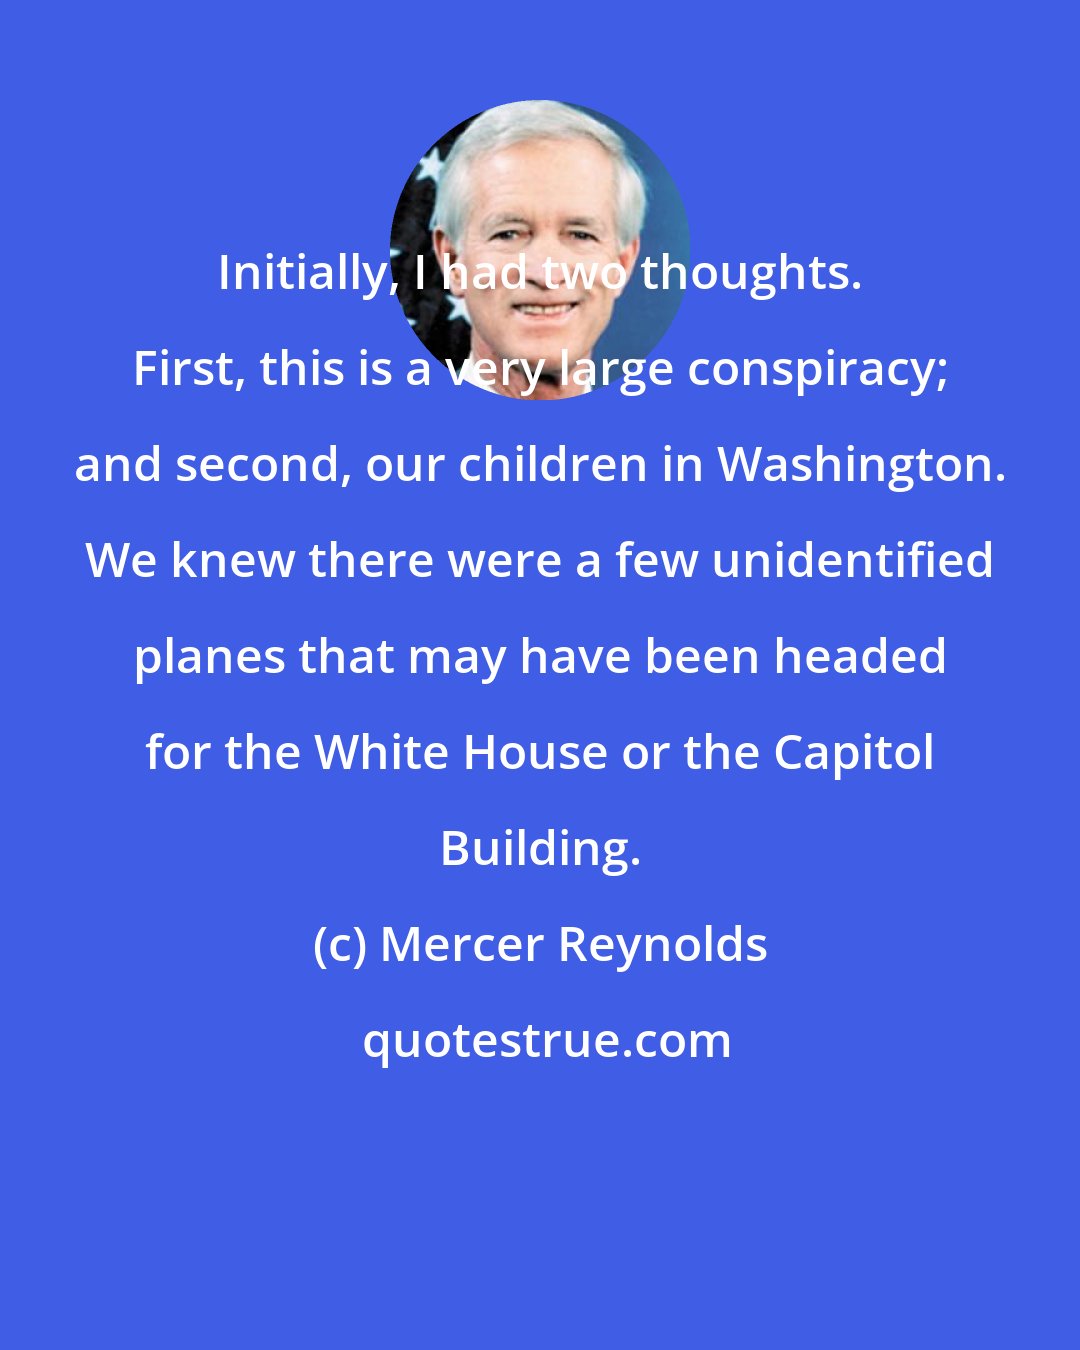 Mercer Reynolds: Initially, I had two thoughts. First, this is a very large conspiracy; and second, our children in Washington. We knew there were a few unidentified planes that may have been headed for the White House or the Capitol Building.